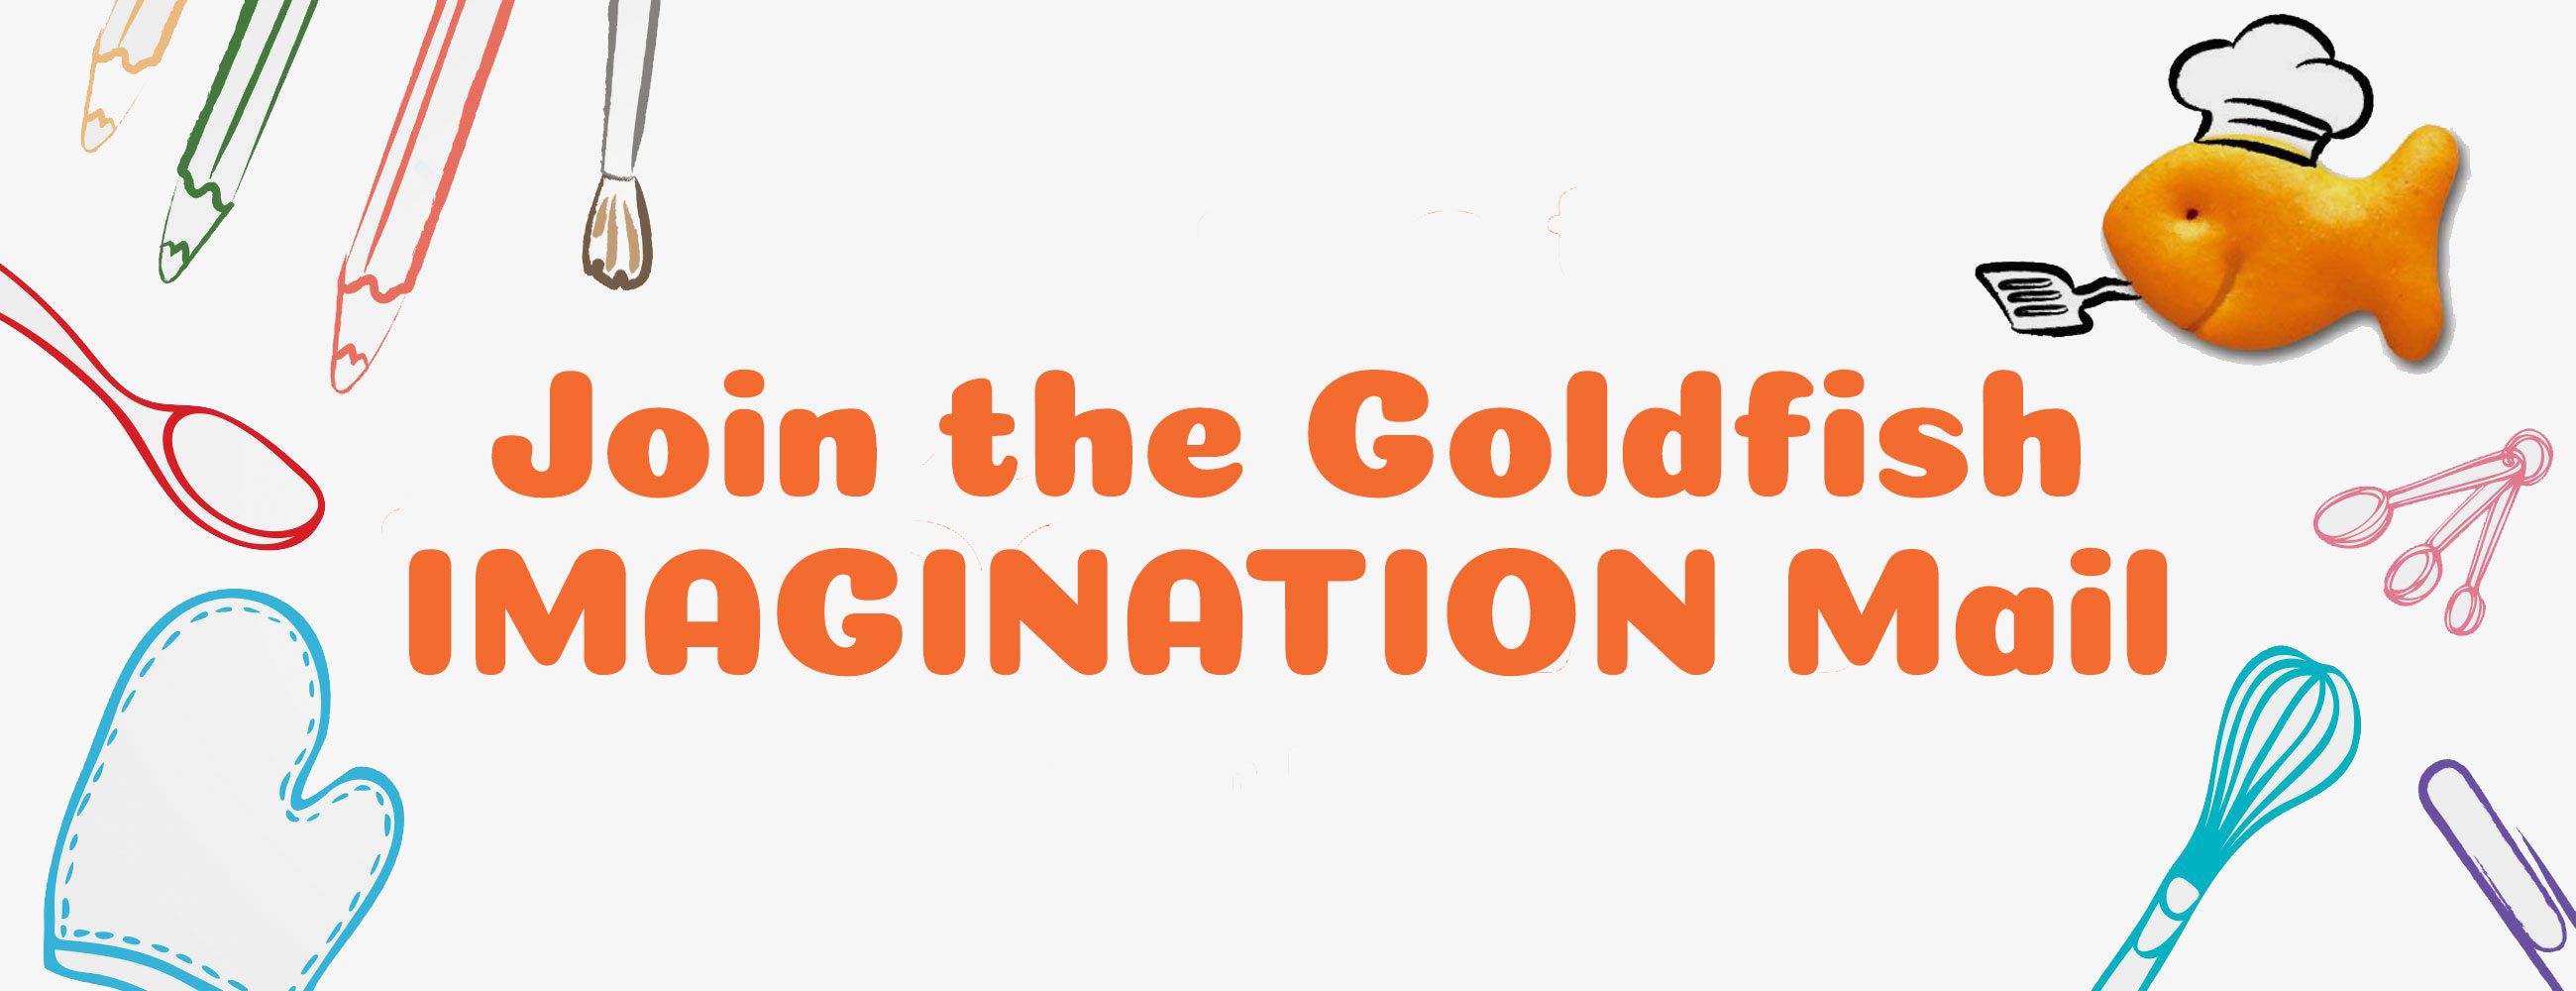 Join the Goldfish IMAGINATION Mail